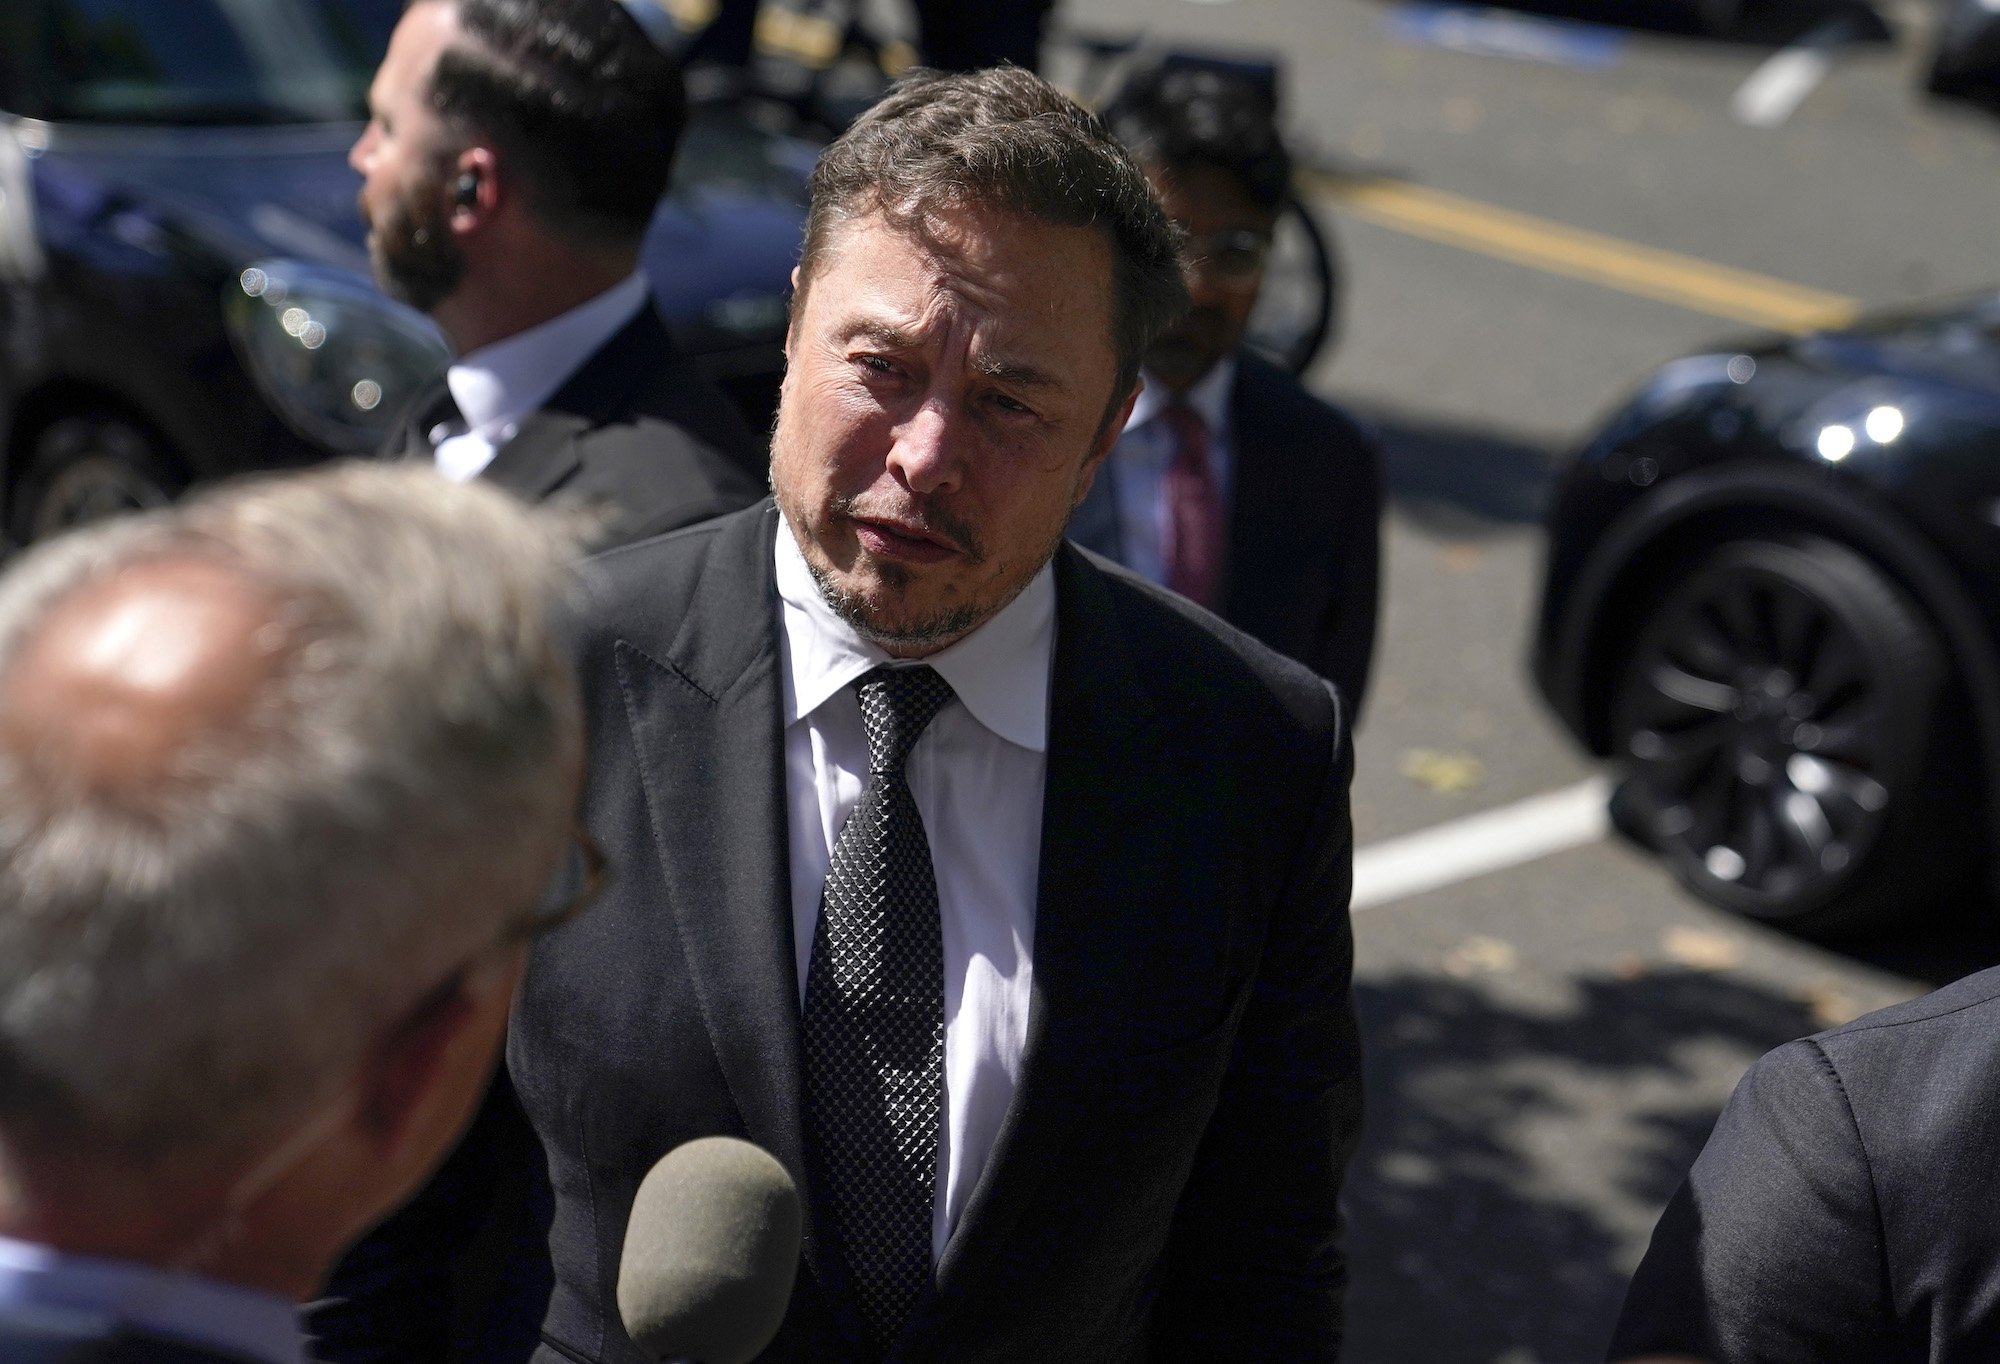 Musk’s Tesla Perks Going Back to 2017 Being Probed by Justice Department